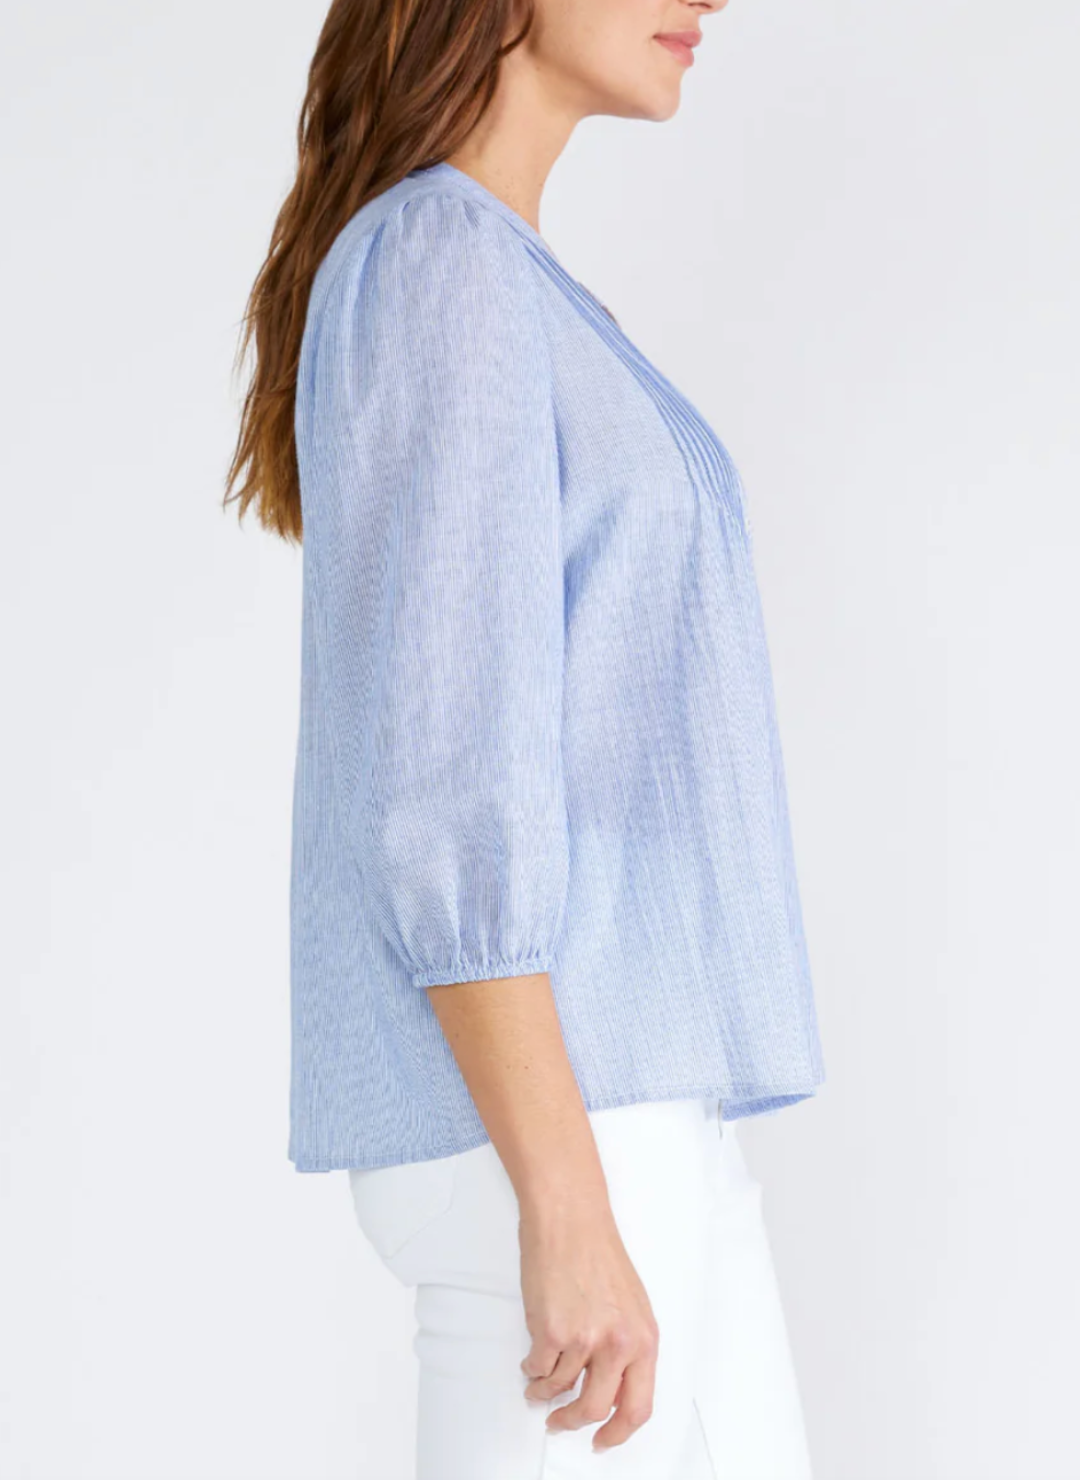 Side view of model wearing LS Cloudy Skies Top with a split v-neckline, 3/4 length sleeve, and elastic cuff. Features a button front with a crochet stitch border and pintuck details styled with white jeans.